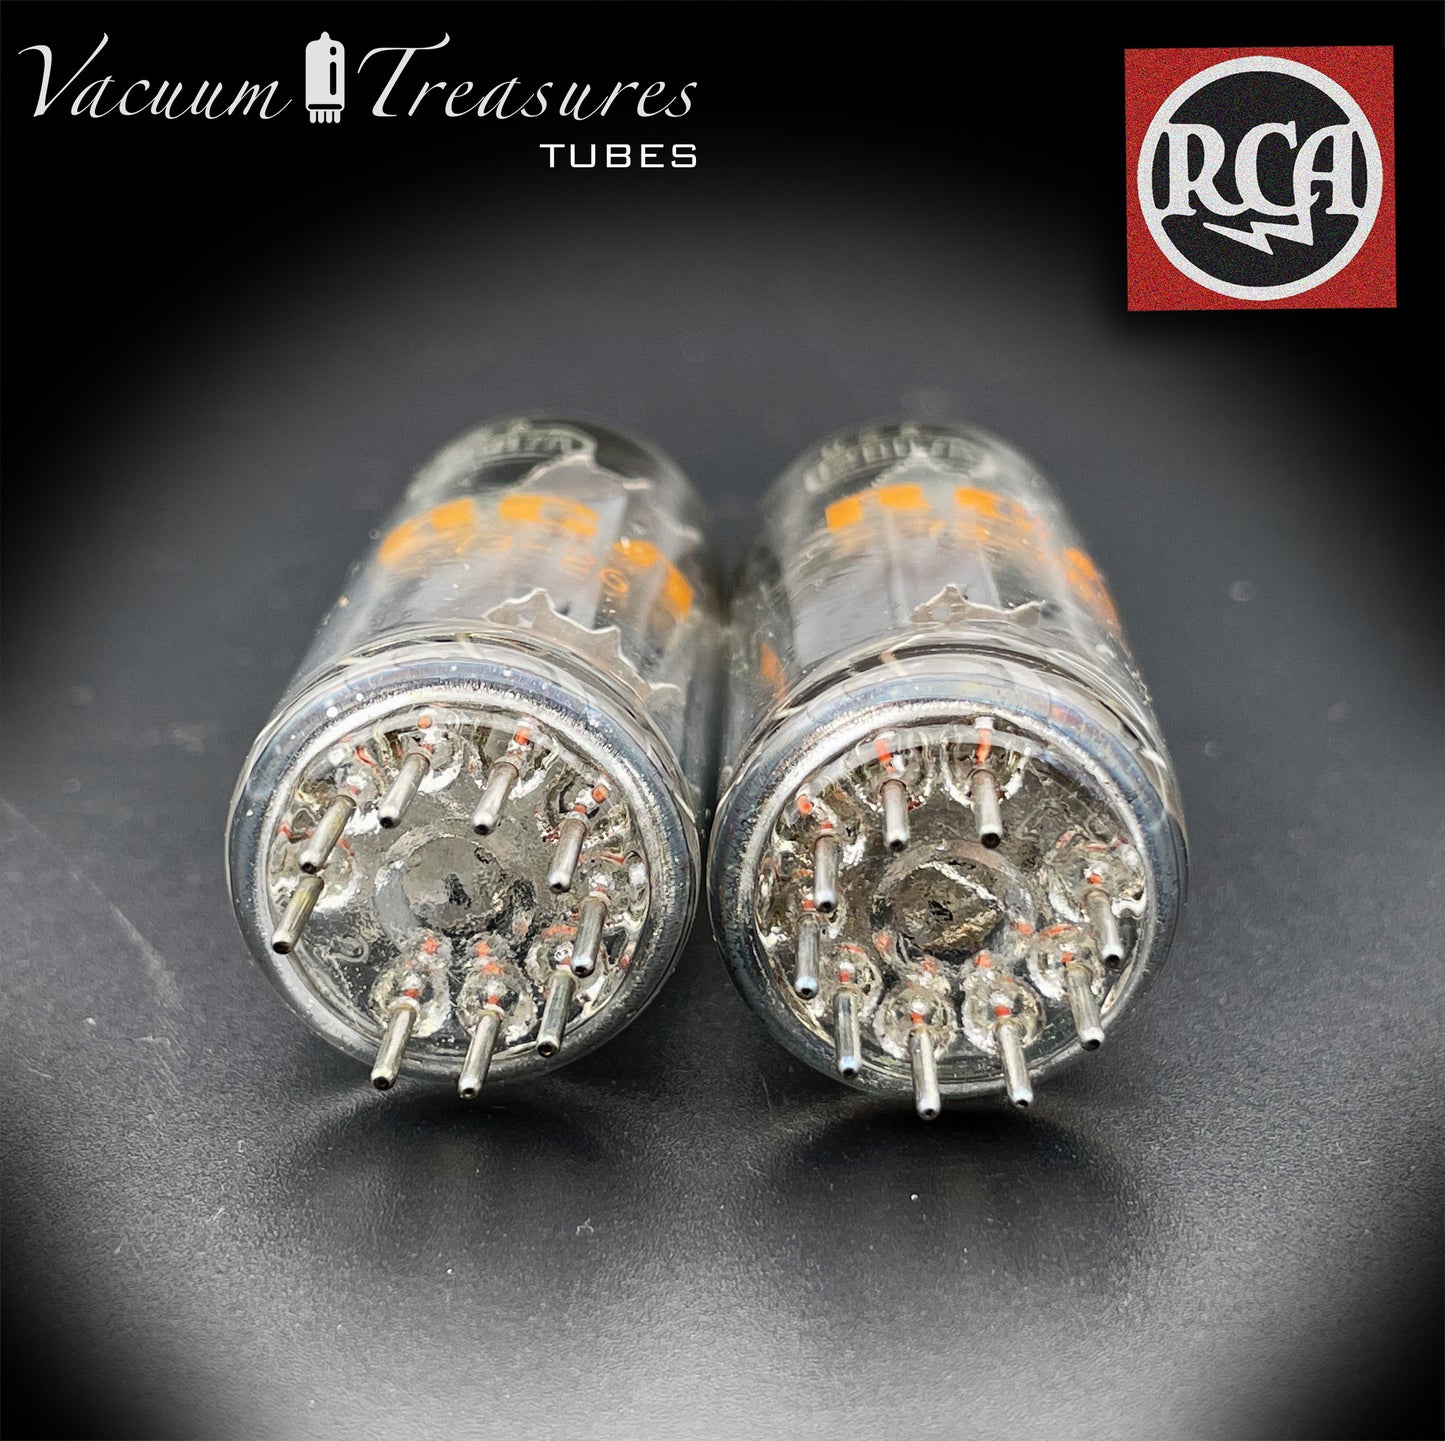 12BH7 A RCA Grey Plates O Getter Matched Pair Tubes Made in USA '73